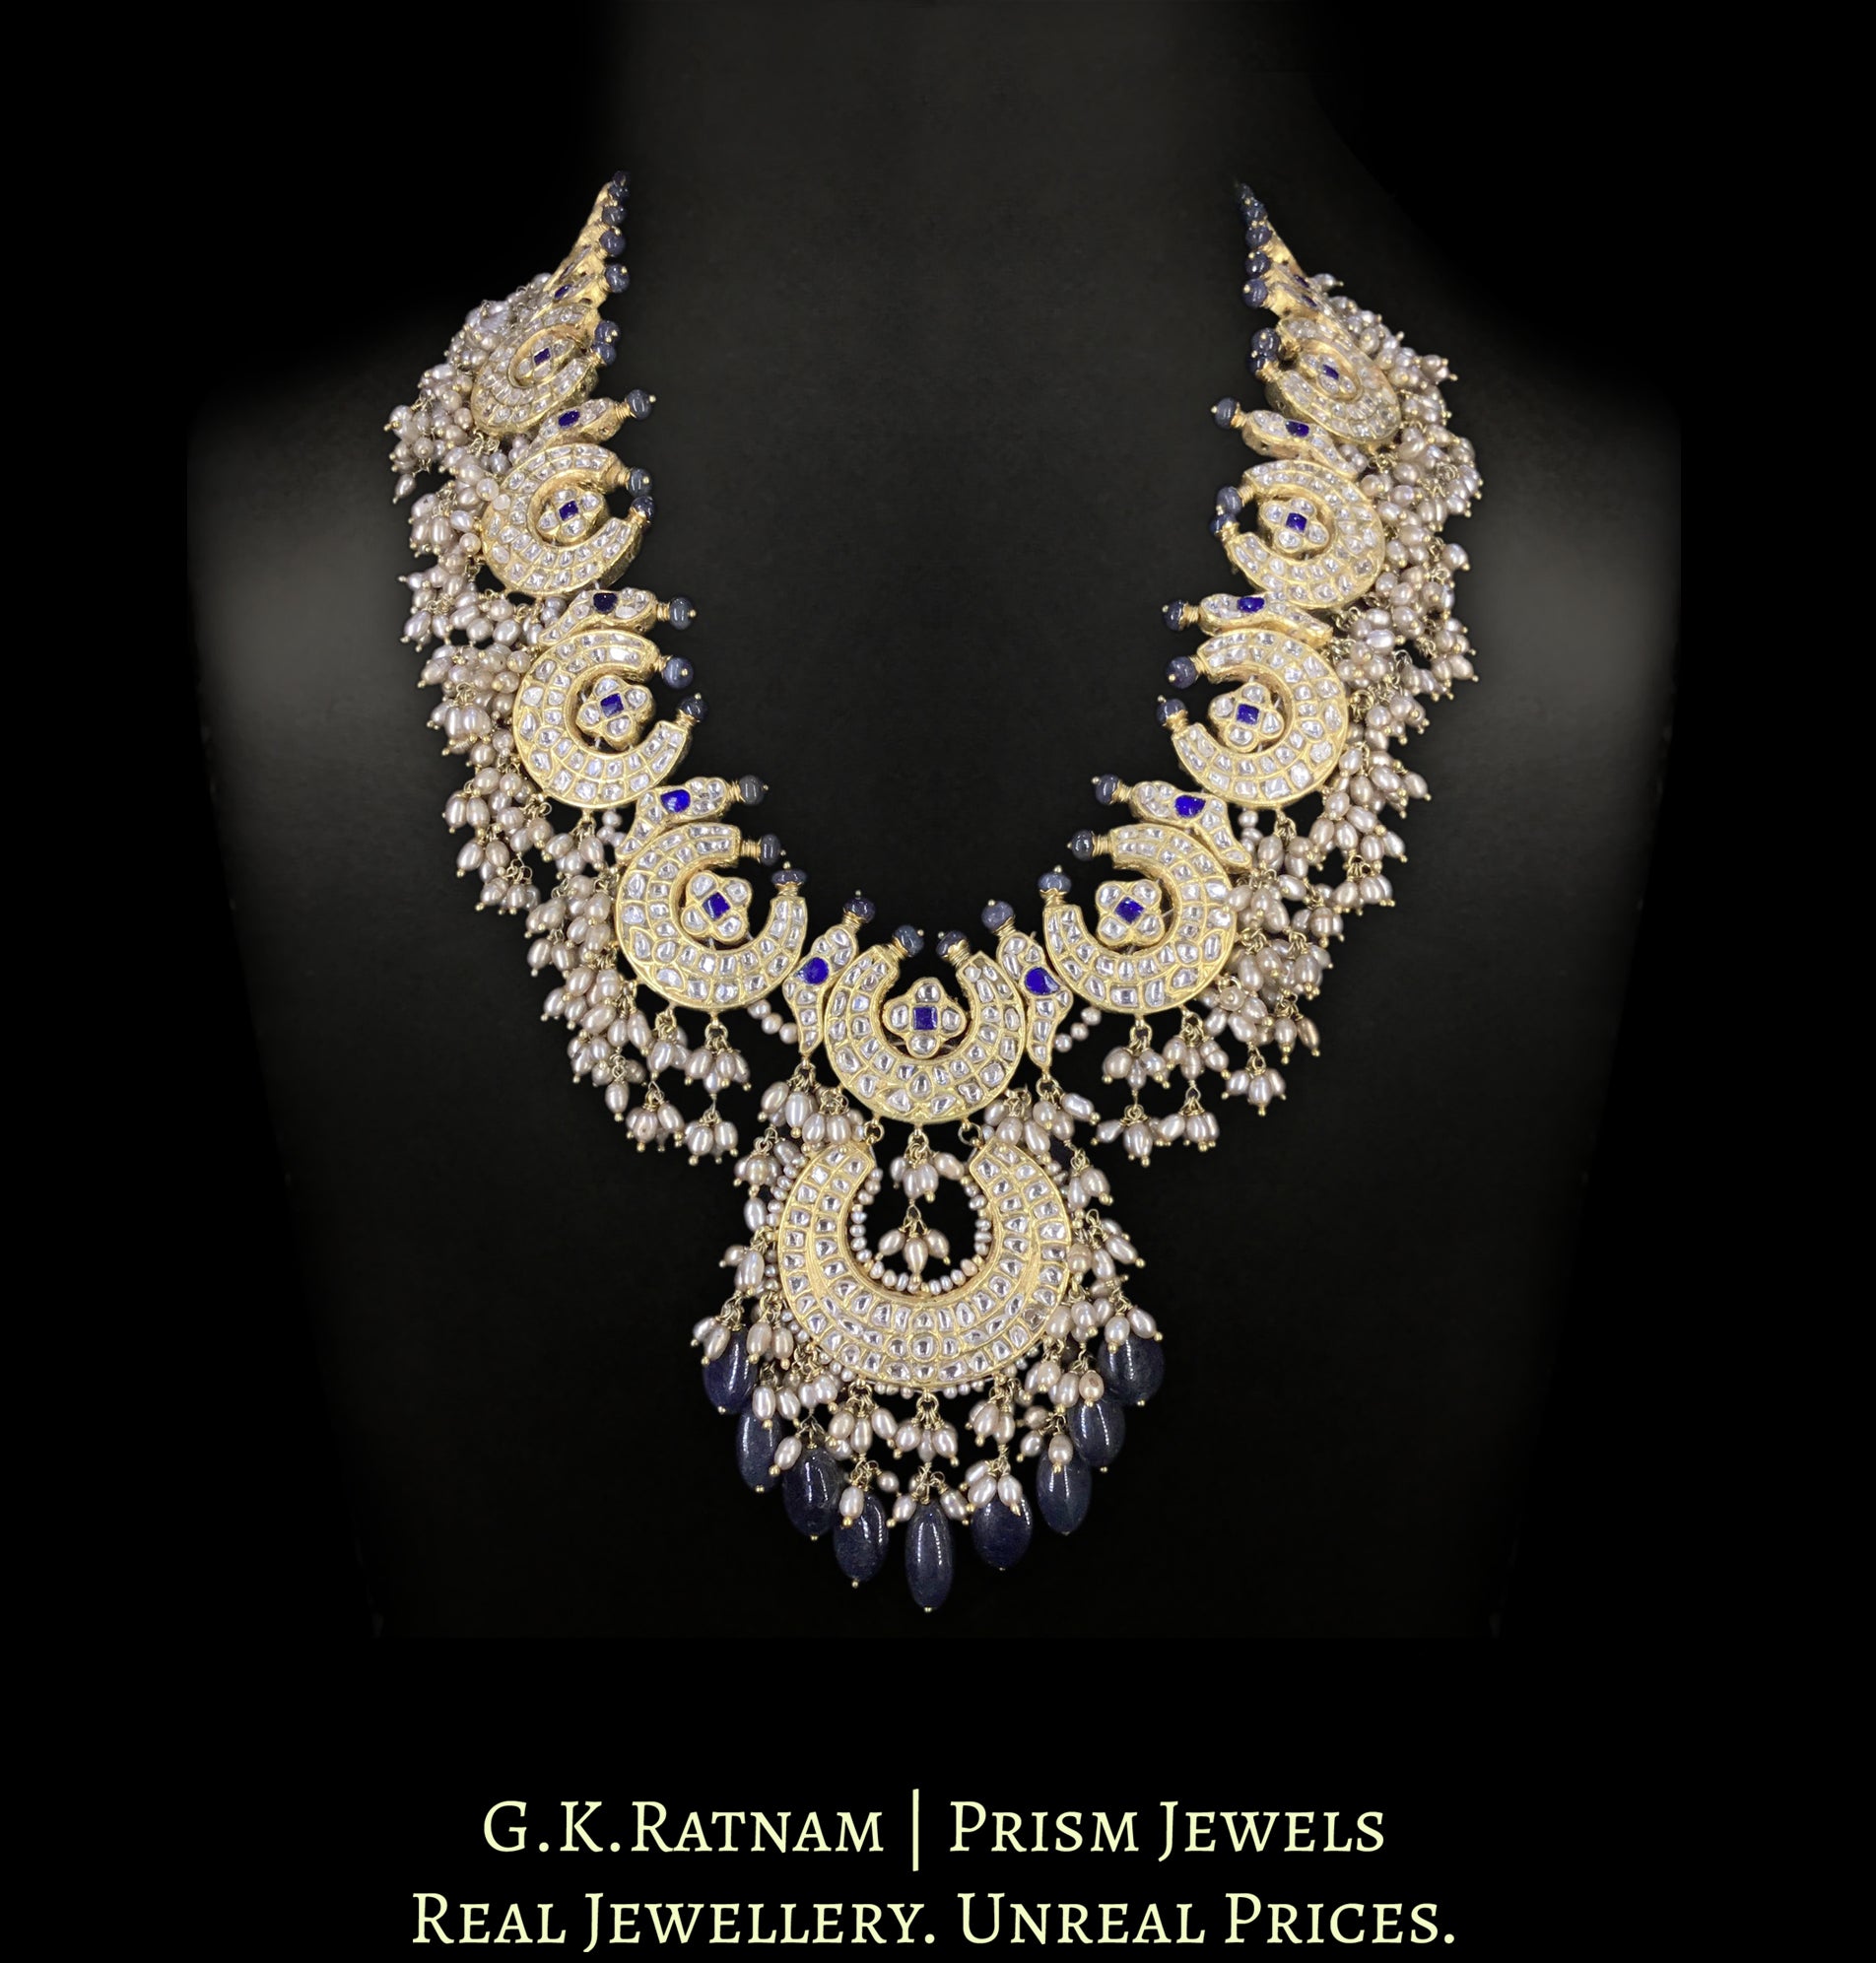 23k Gold and Diamond Polki Long Necklace with Chand Motifs strung in Antiqued Rice Pearls and Blue Sapphires